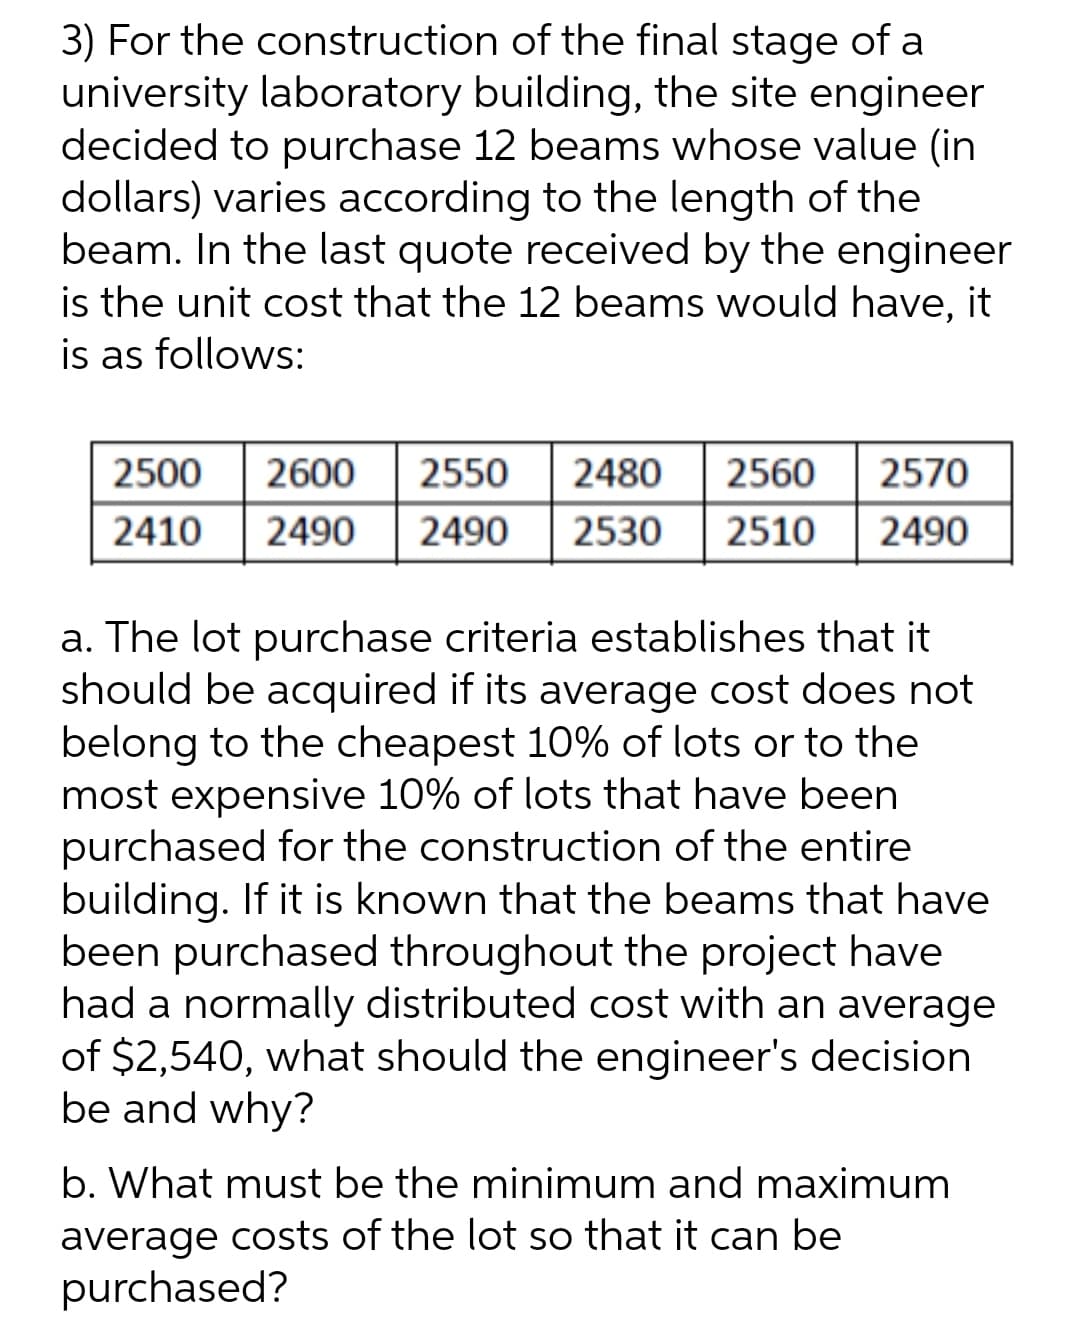 3) For the construction of the final stage of a
university laboratory building, the site engineer
decided to purchase 12 beams whose value (in
dollars) varies according to the length of the
beam. In the last quote received by the engineer
is the unit cost that the 12 beams would have, it
is as follows:
2500
2600 2550
2480 2560 2570
2490 2490 2530 2510 2490
2410
a. The lot purchase criteria establishes that it
should be acquired if its average cost does not
belong to the cheapest 10% of lots or to the
most expensive 10% of lots that have been
purchased for the construction of the entire
building. If it is known that the beams that have
been purchased throughout the project have
had a normally distributed cost with an average
of $2,540, what should the engineer's decision
be and why?
b. What must be the minimum and maximum
average costs of the lot so that it can be
purchased?